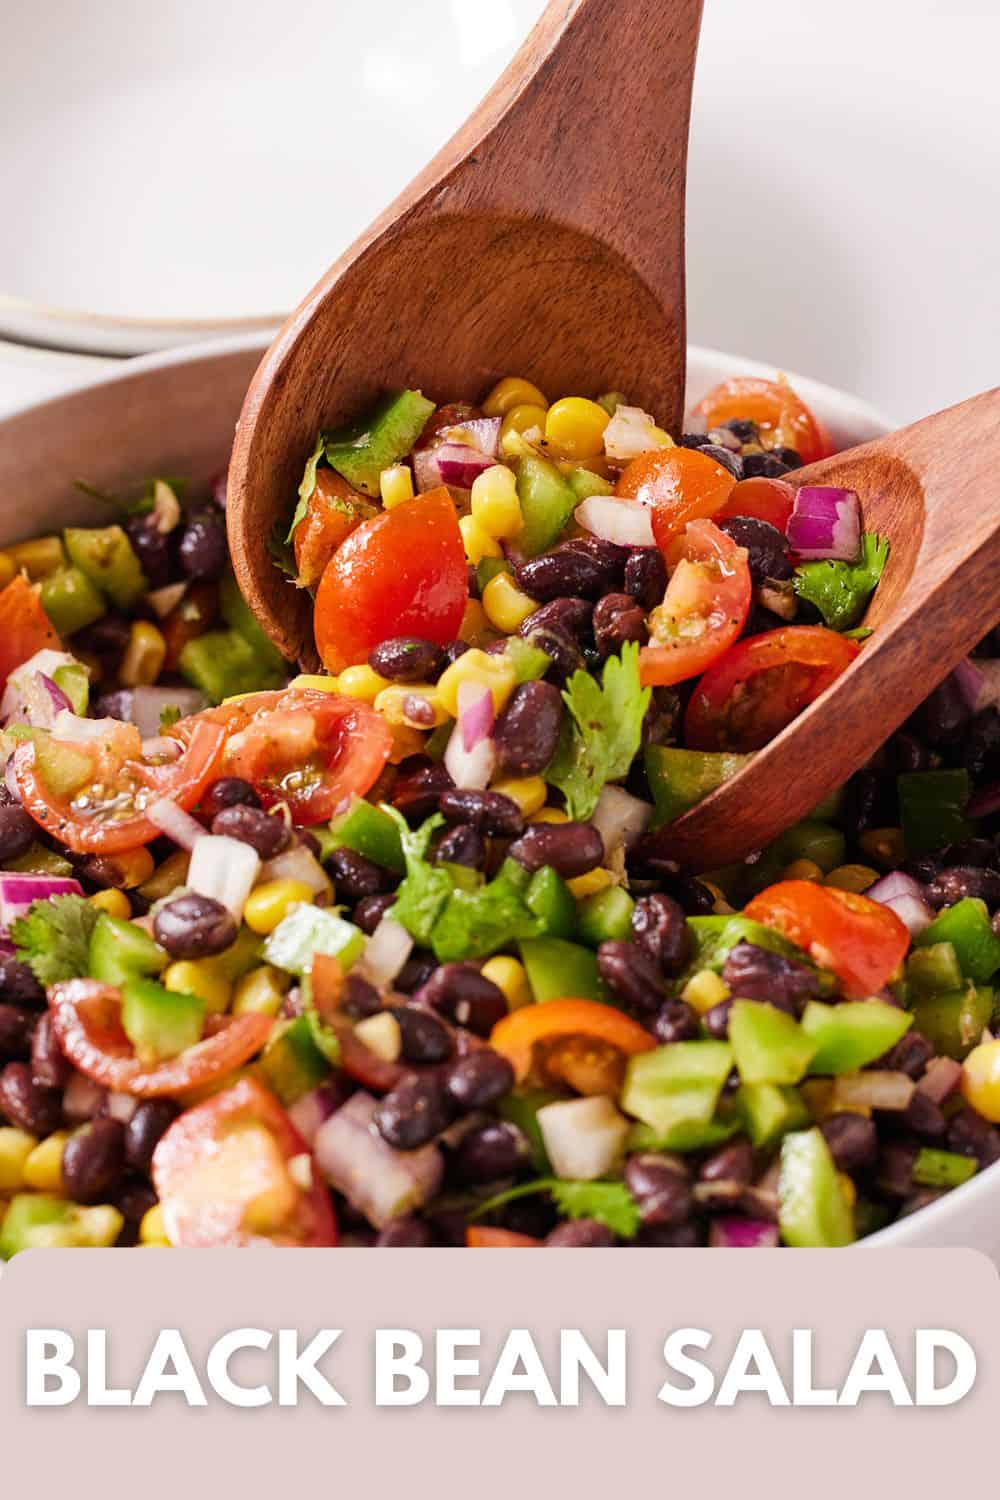 Black Bean Salad - Cooking With Coit